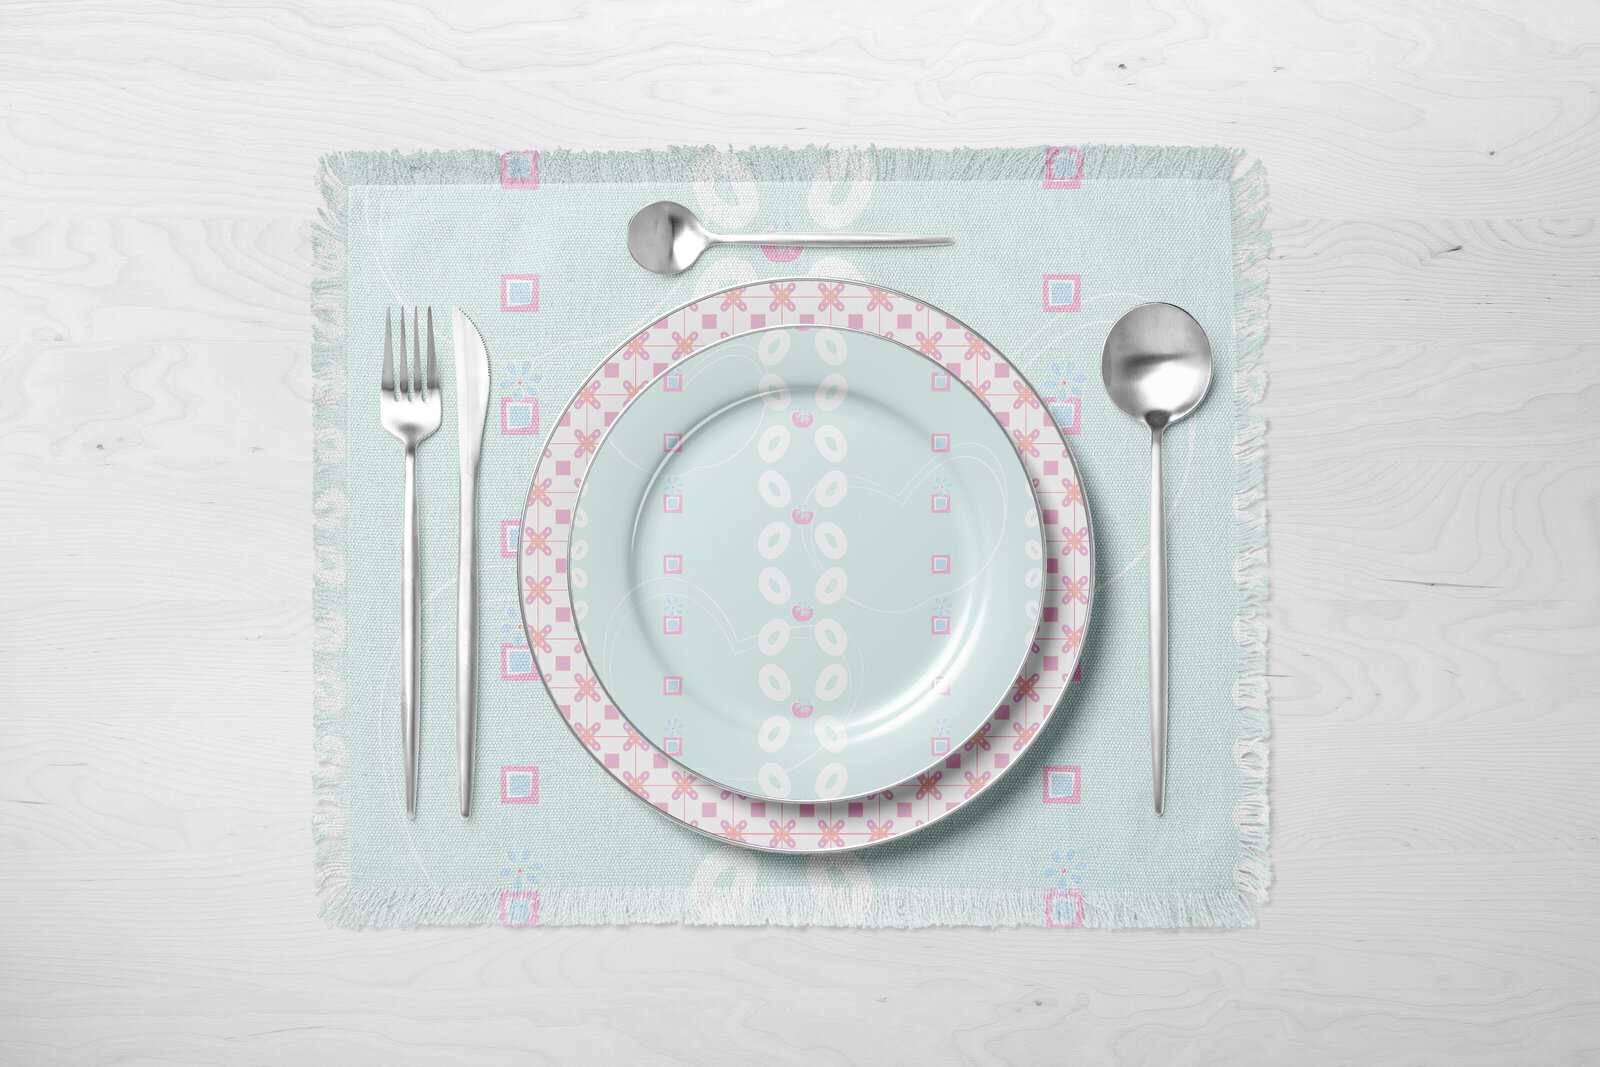 patterned placemat and dinner plates